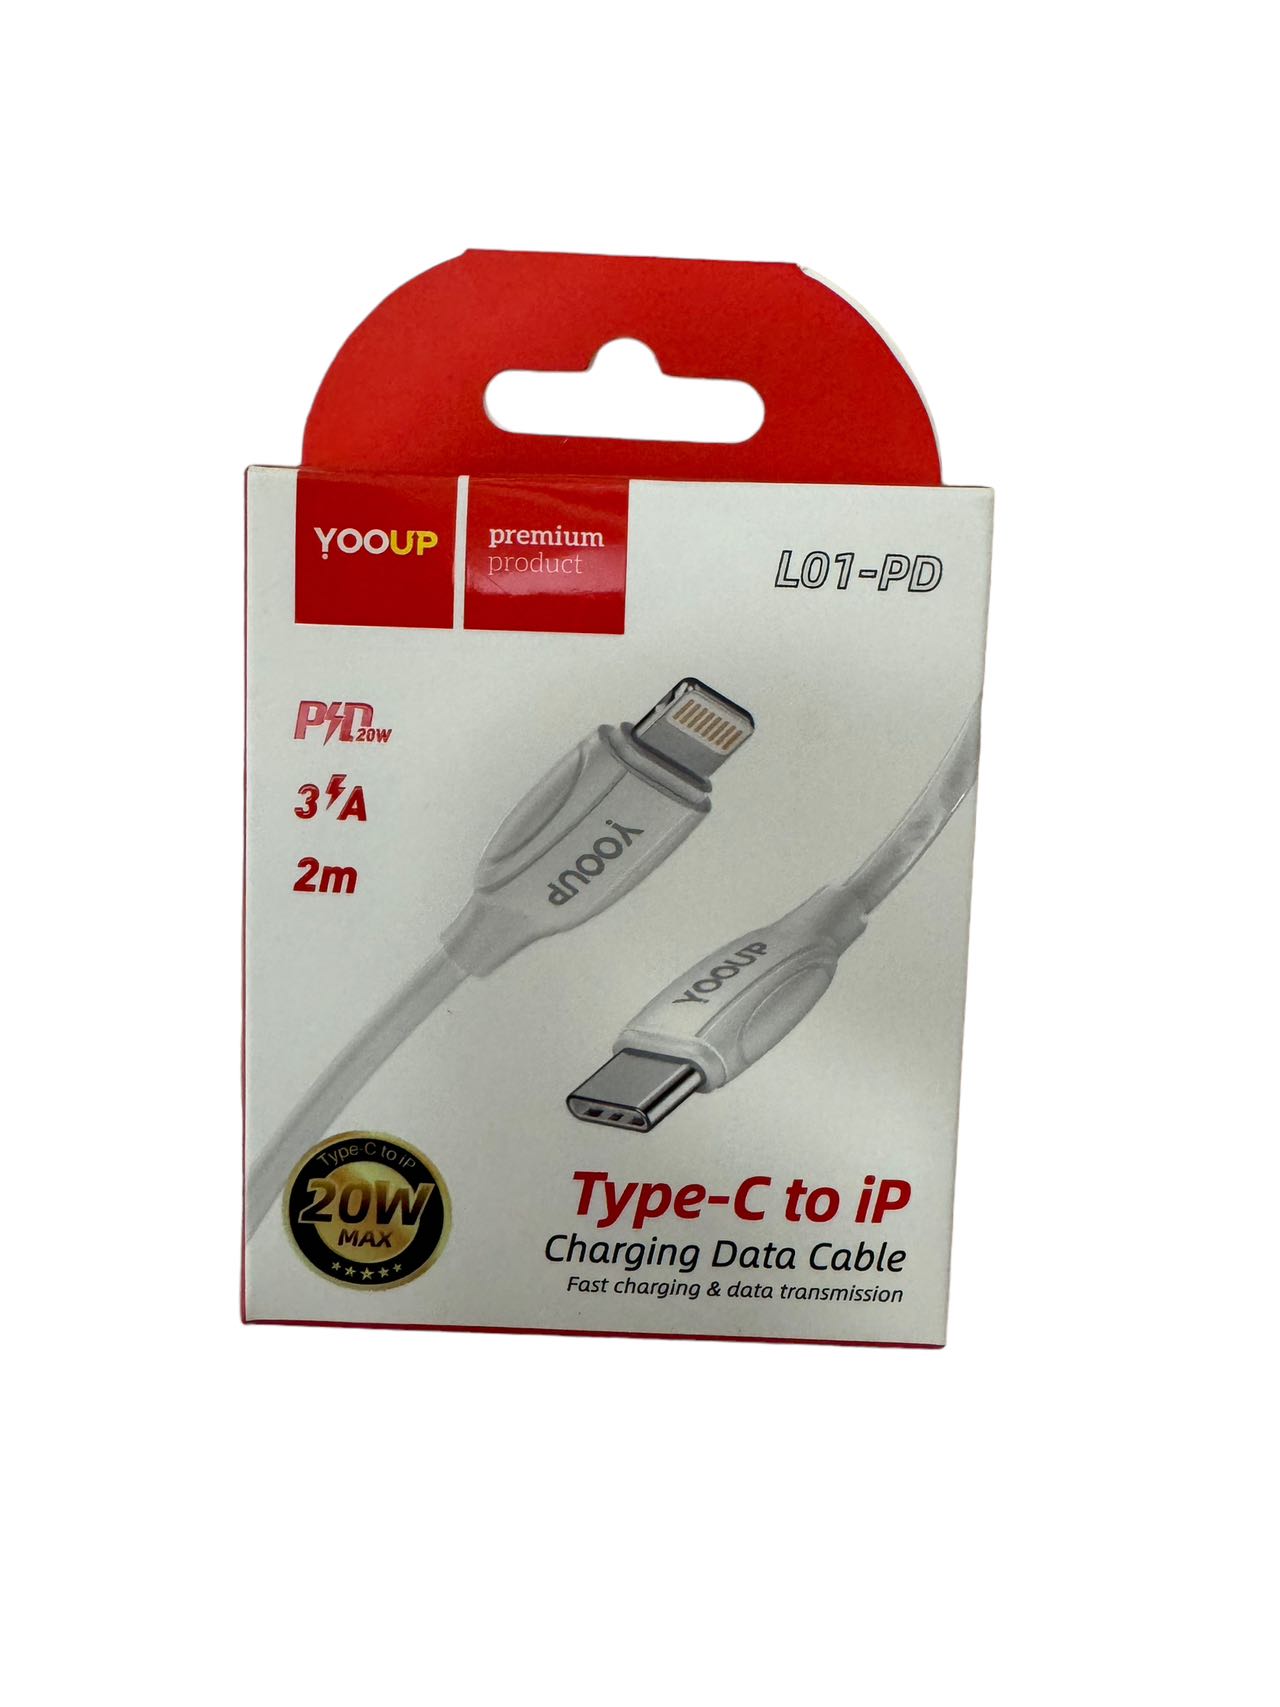 YOOUP Type-C to iP Charging Data Cable - L01-PD (PM029544)